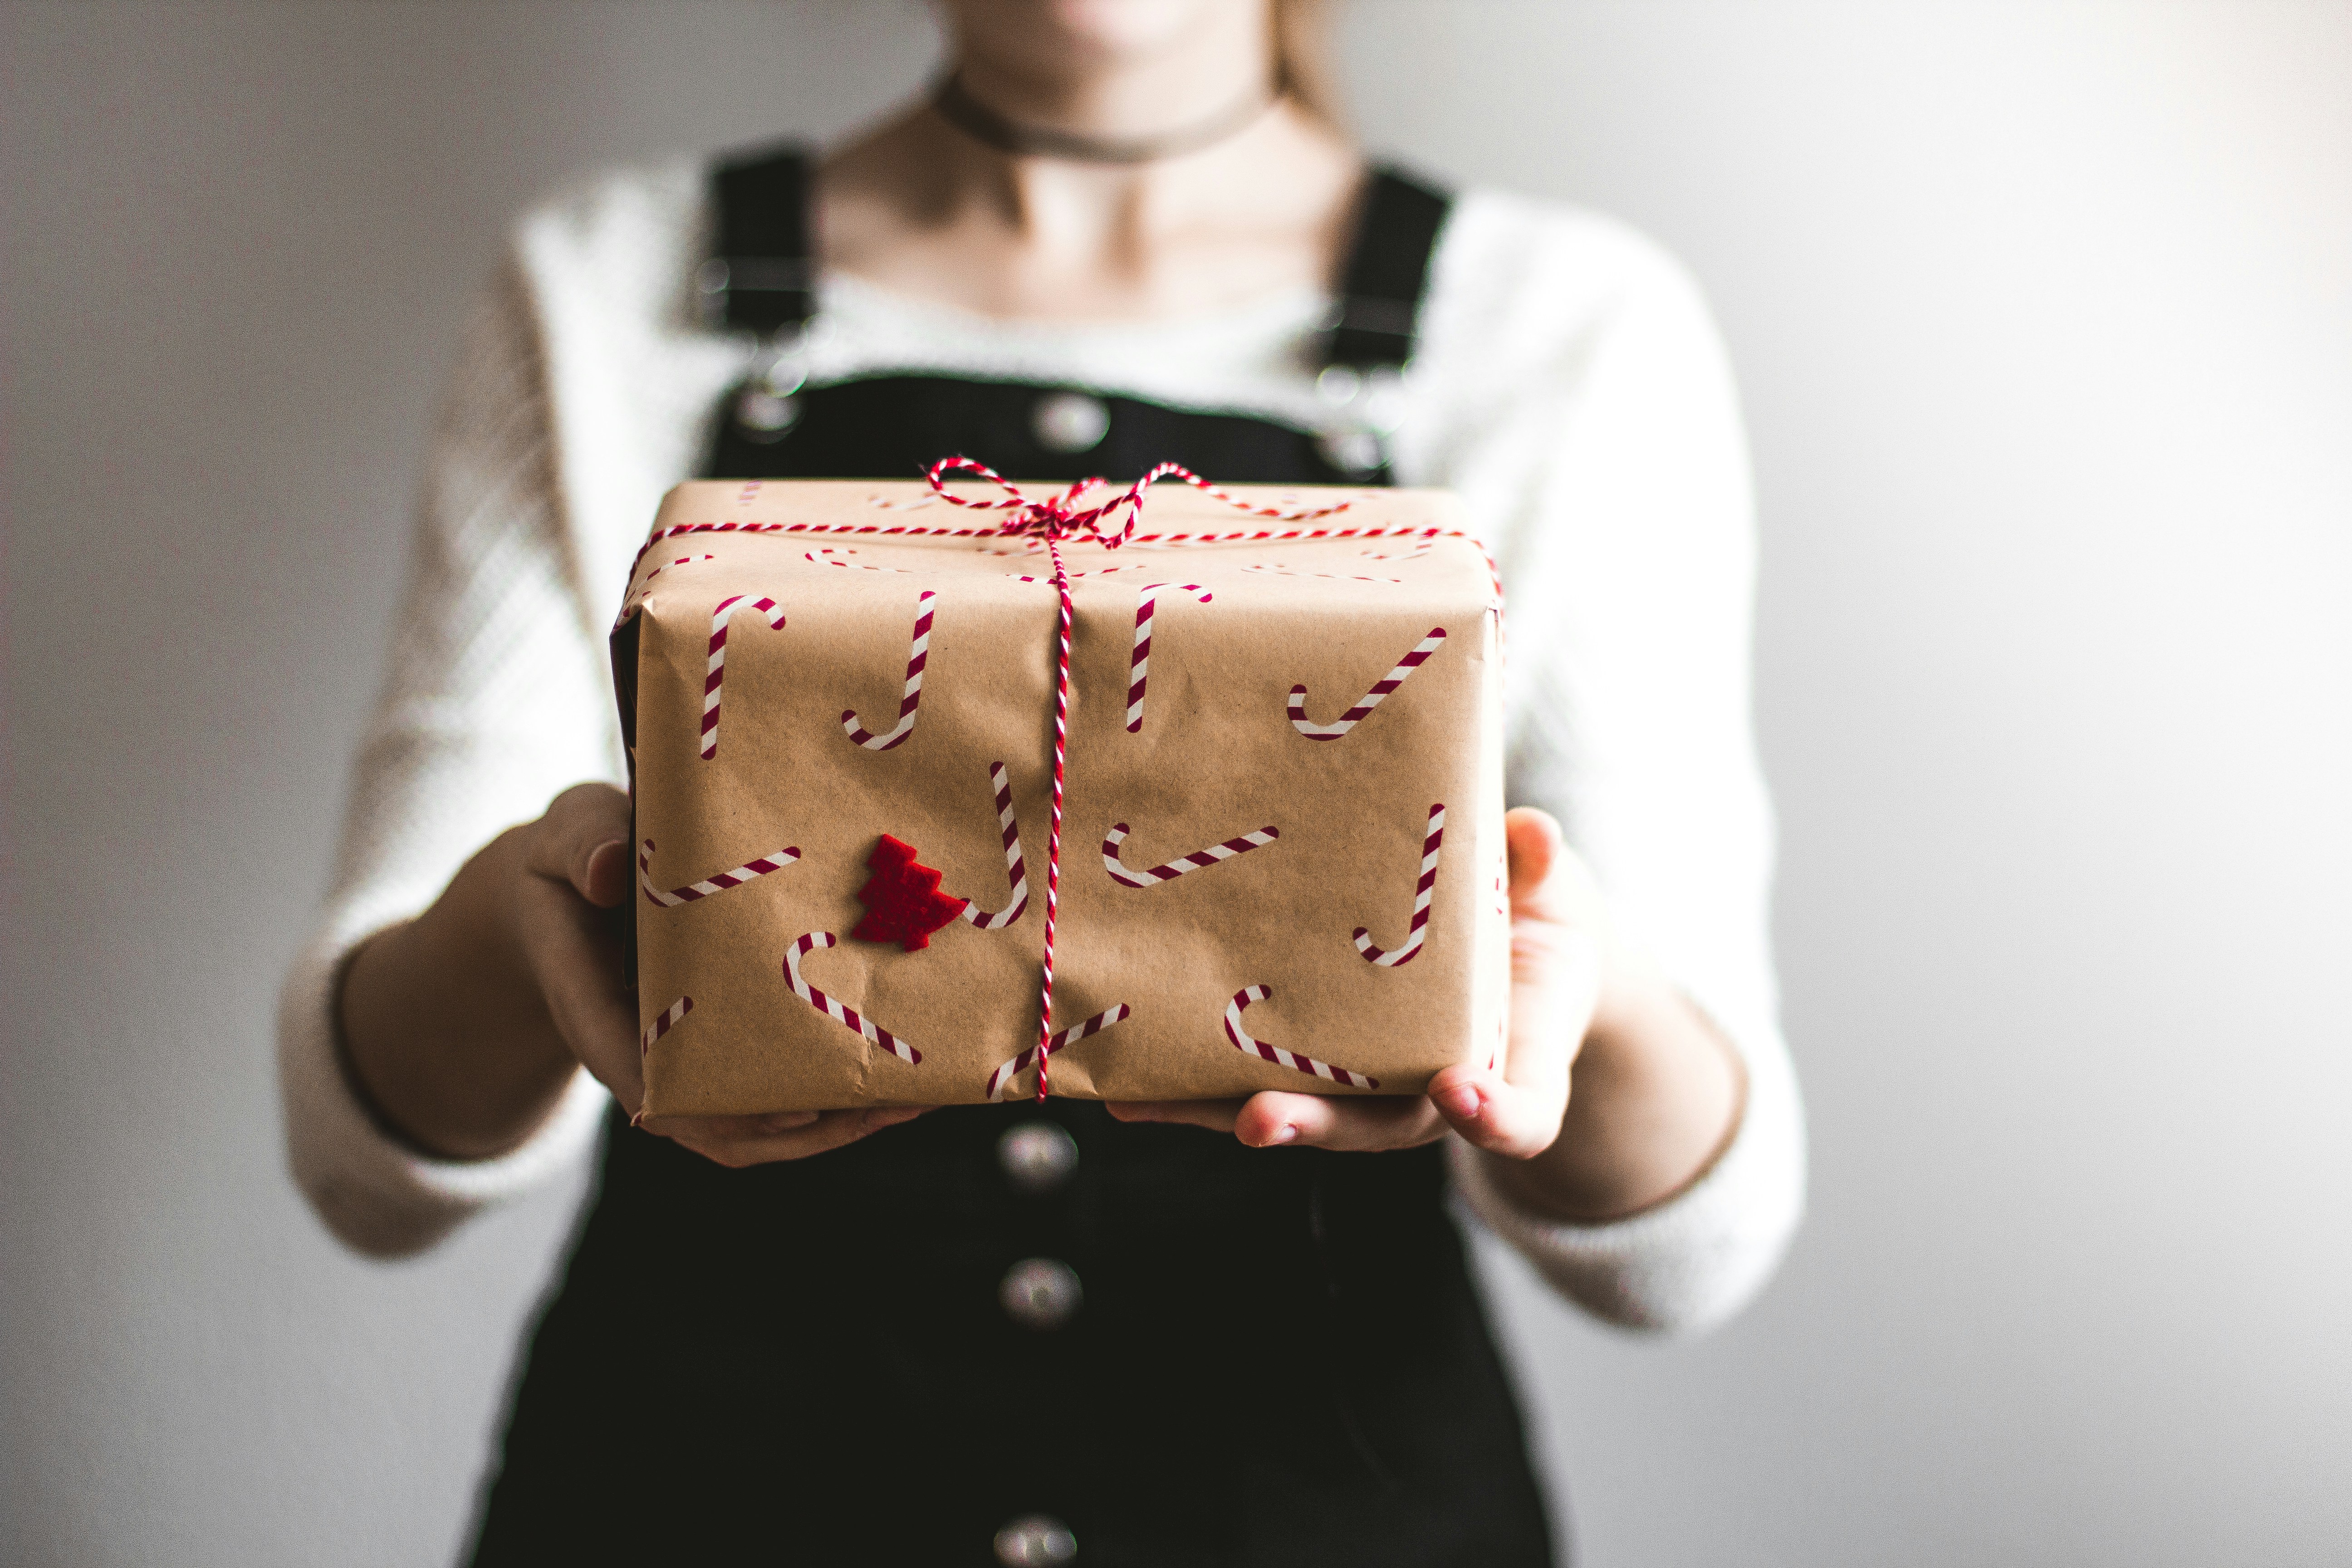 A person holding a gift box | Source: Pexels